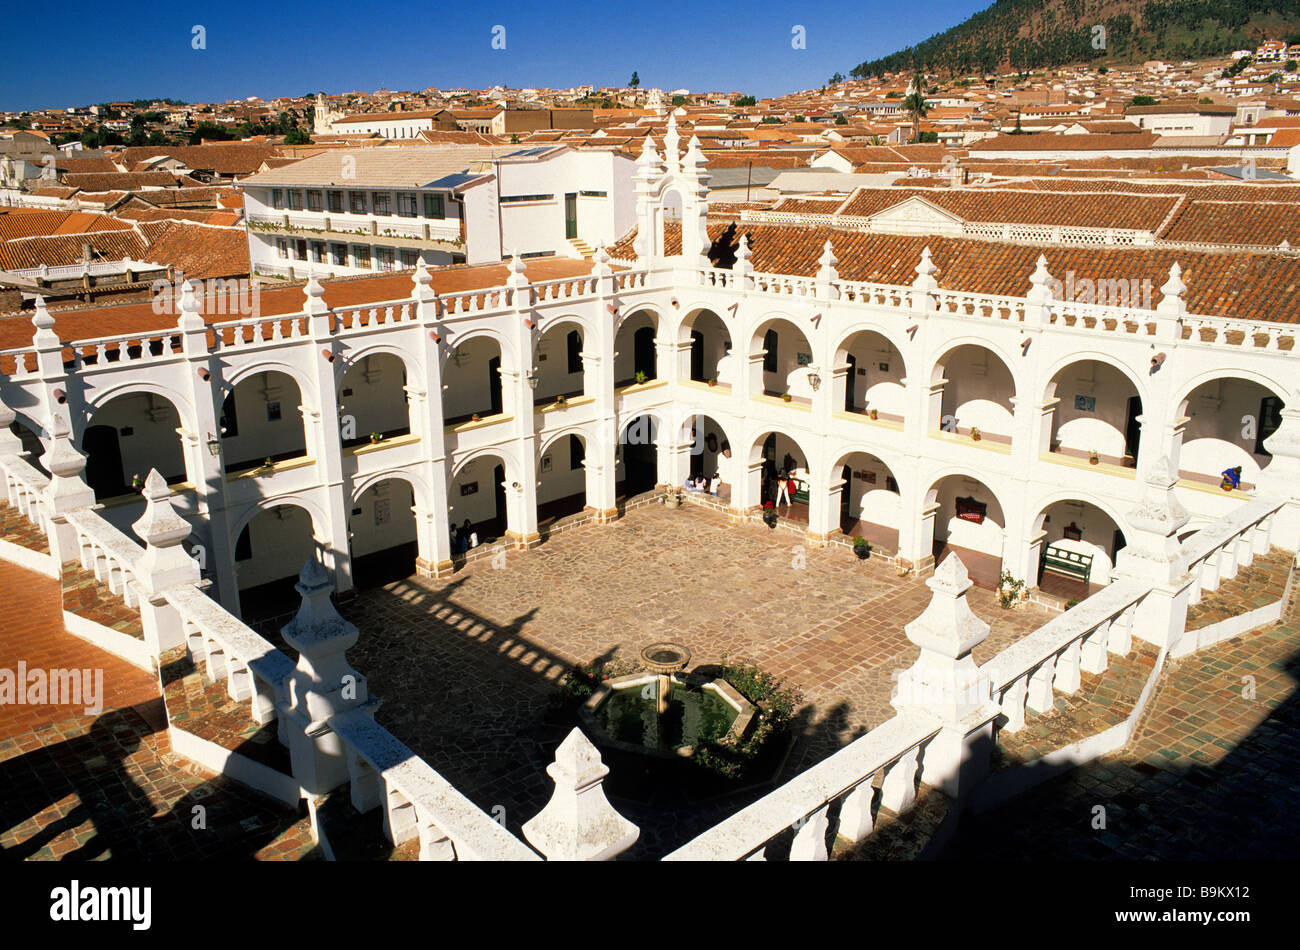 Bolivia, Chuquisaca department, Sucre, town classified as World Heritage by UNESCO, San Felipe Neri convent (Neoclassical Stock Photo